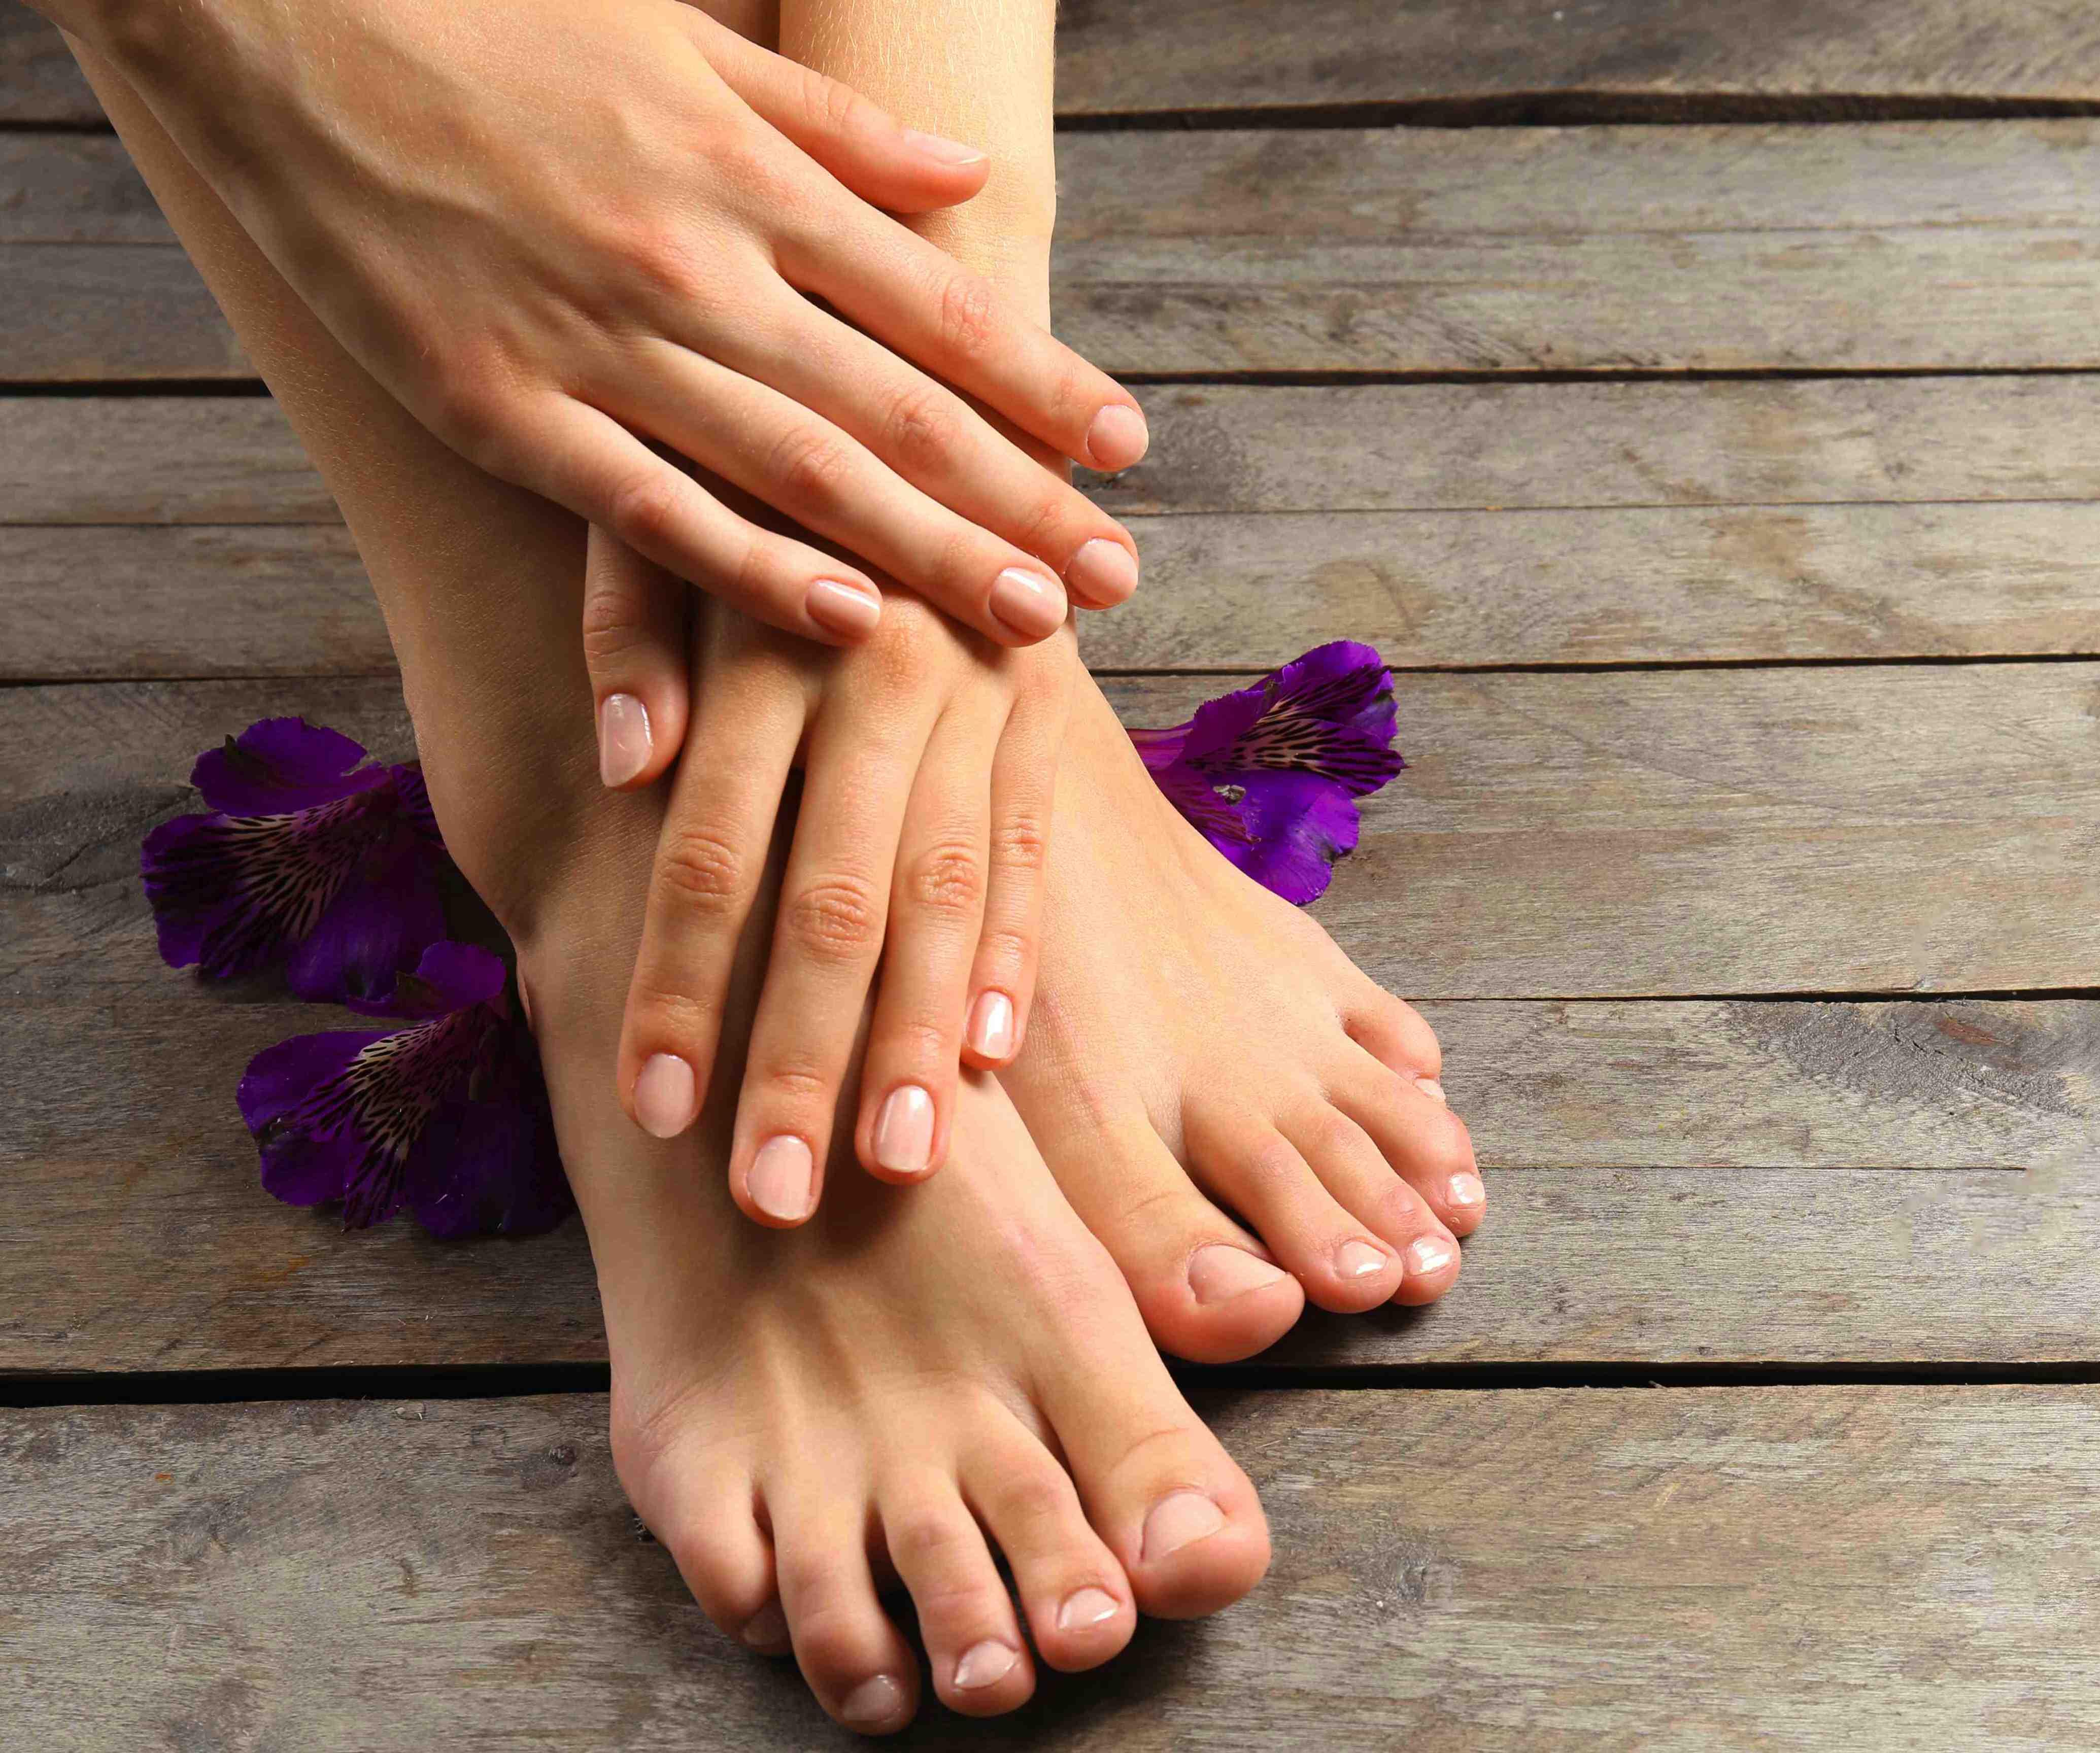 How to treat 10 Common Foot Problems